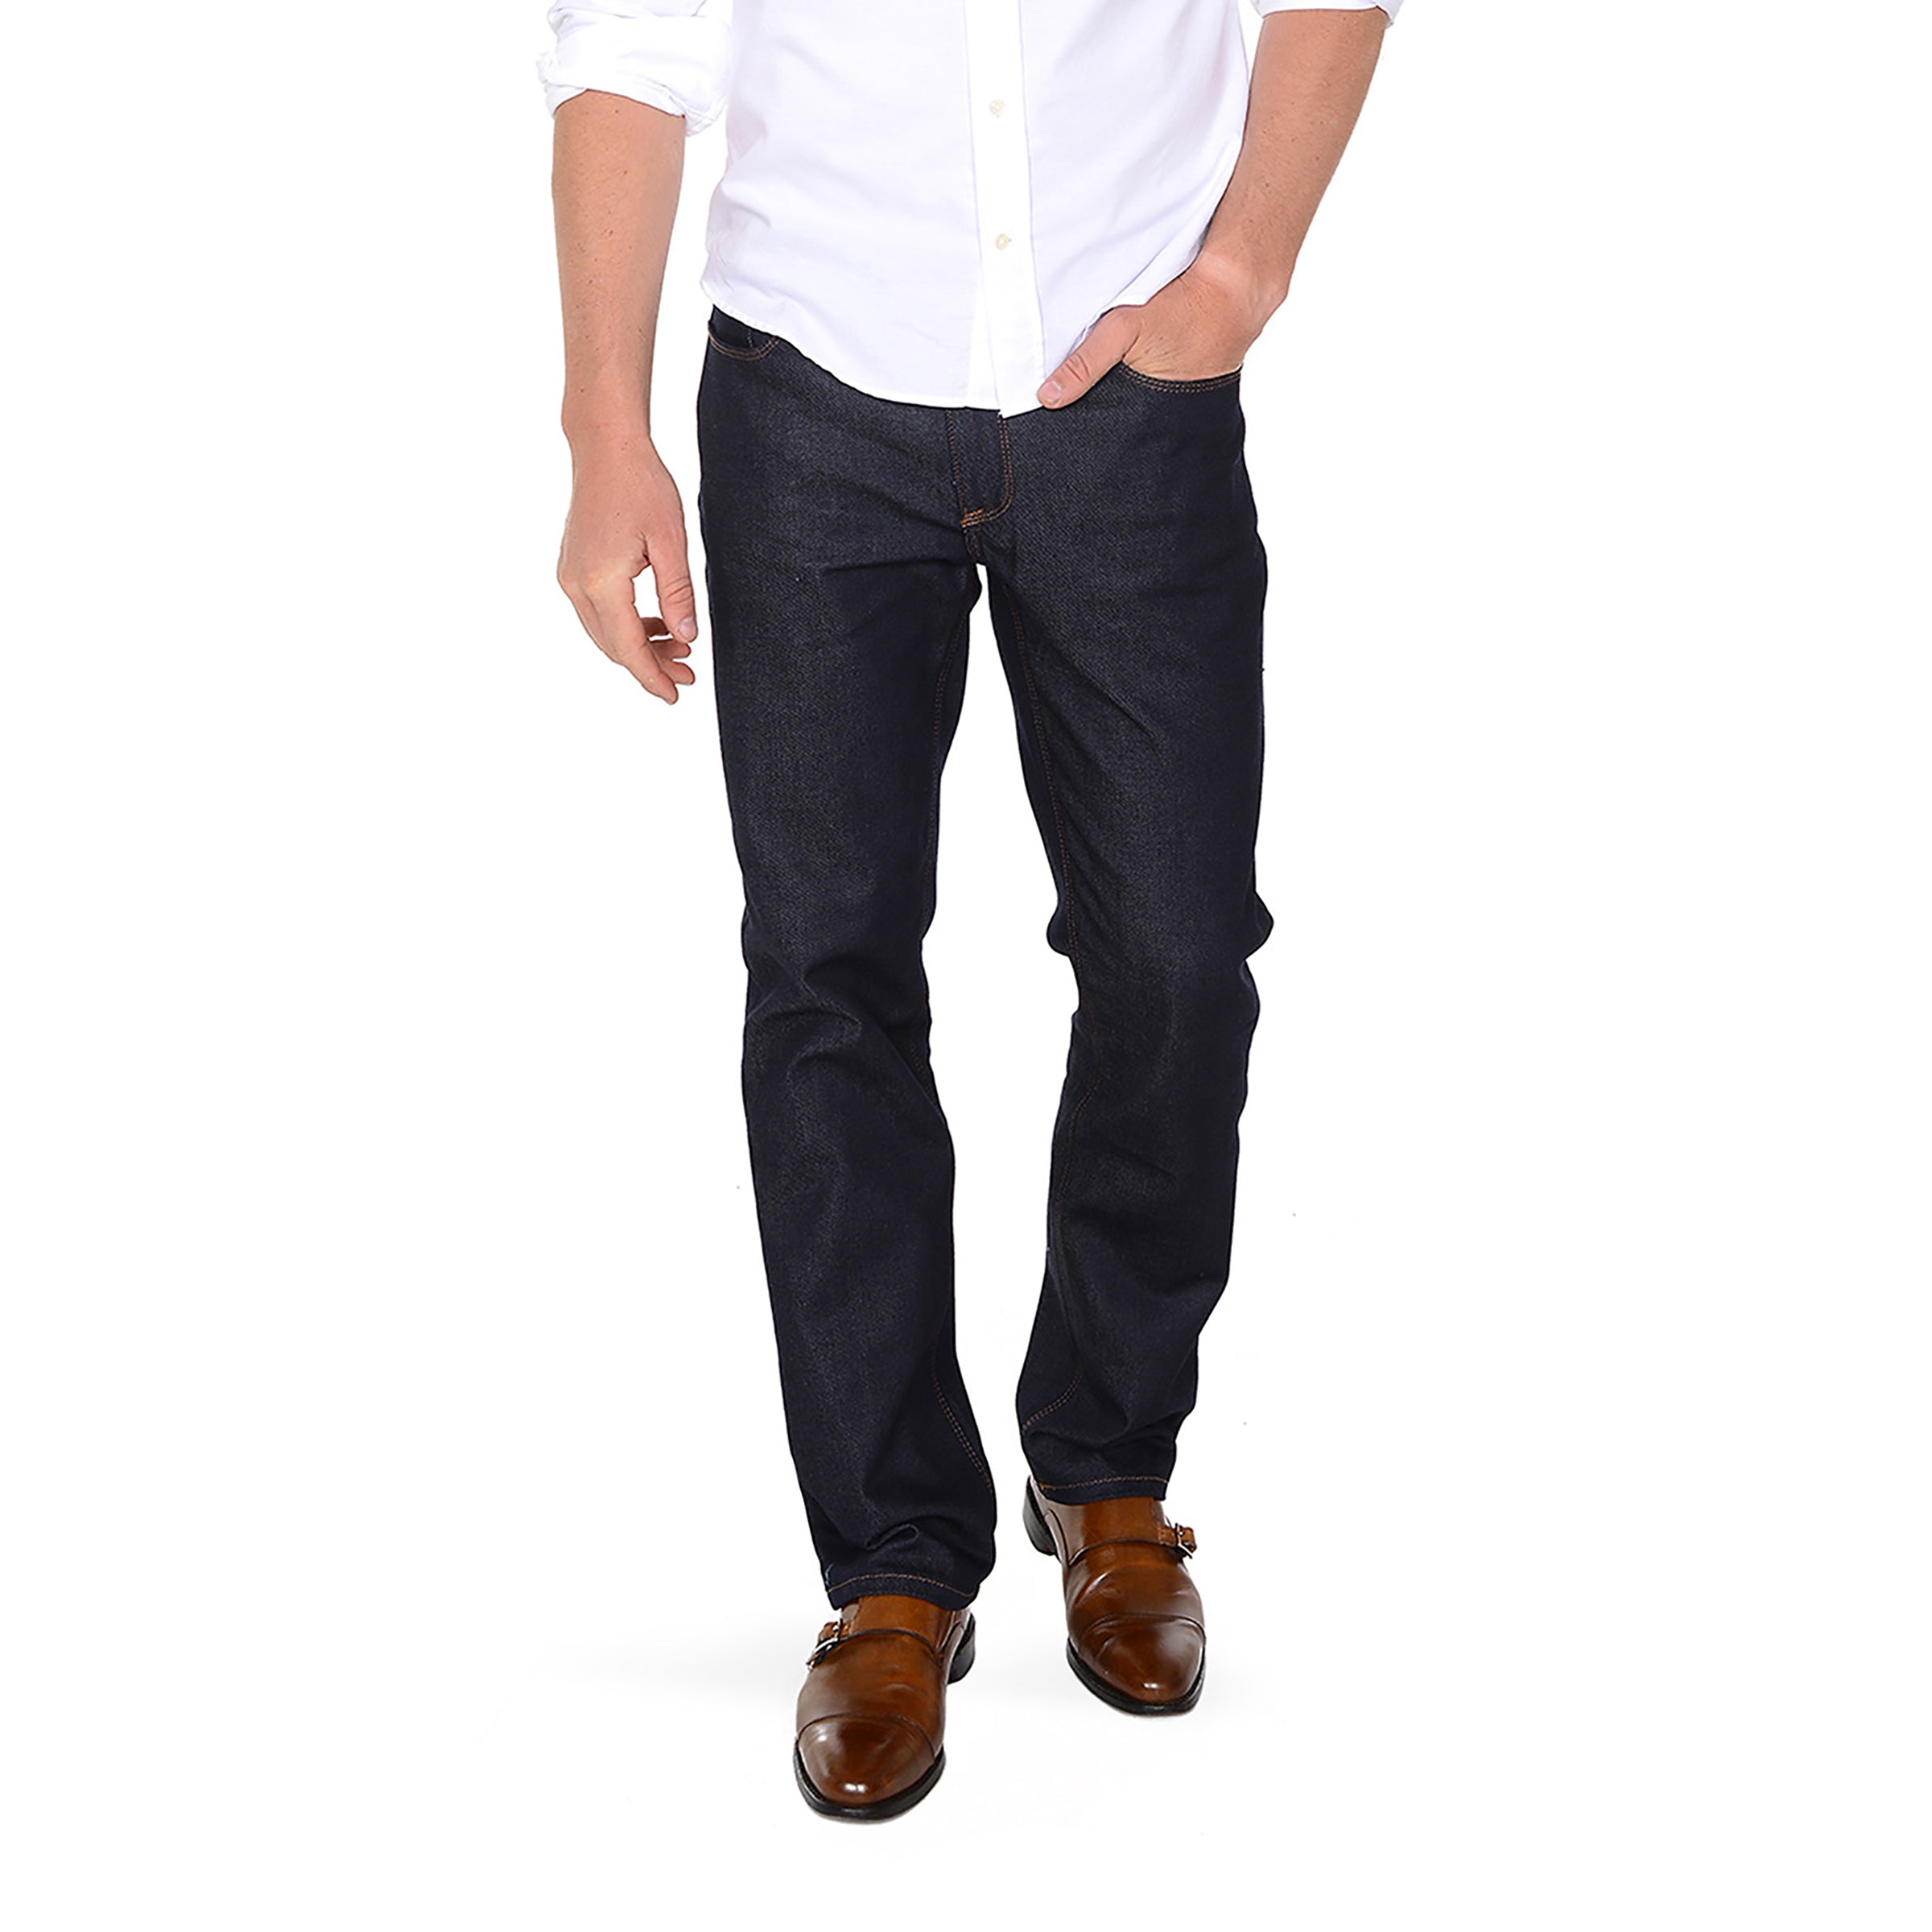 Men wearing Azul oscuro Straight Oliver Jeans